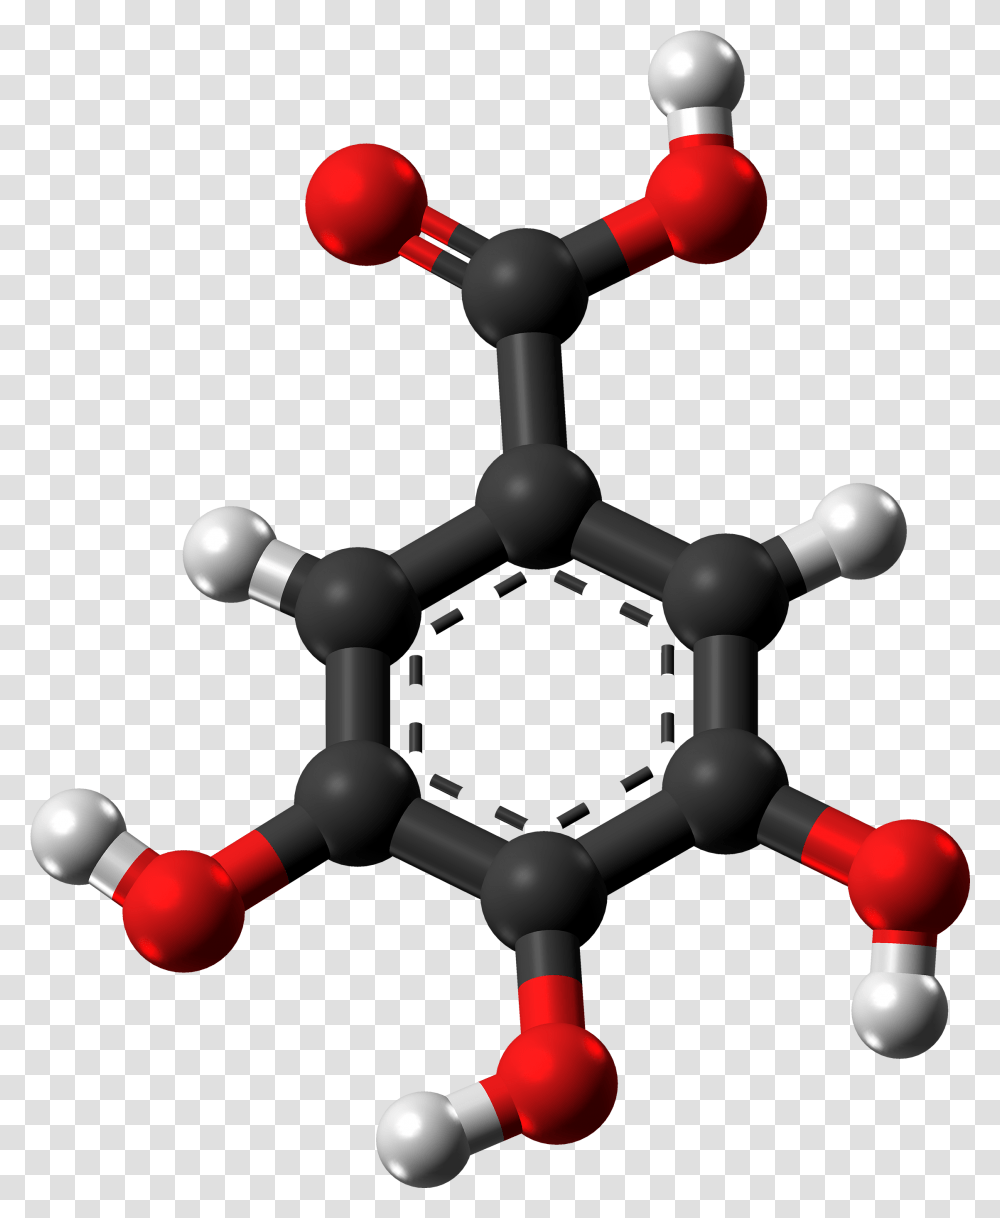 Gallic Acid Molecule Ball From Xtal Tolune Dfinition, Sphere, Juggling Transparent Png